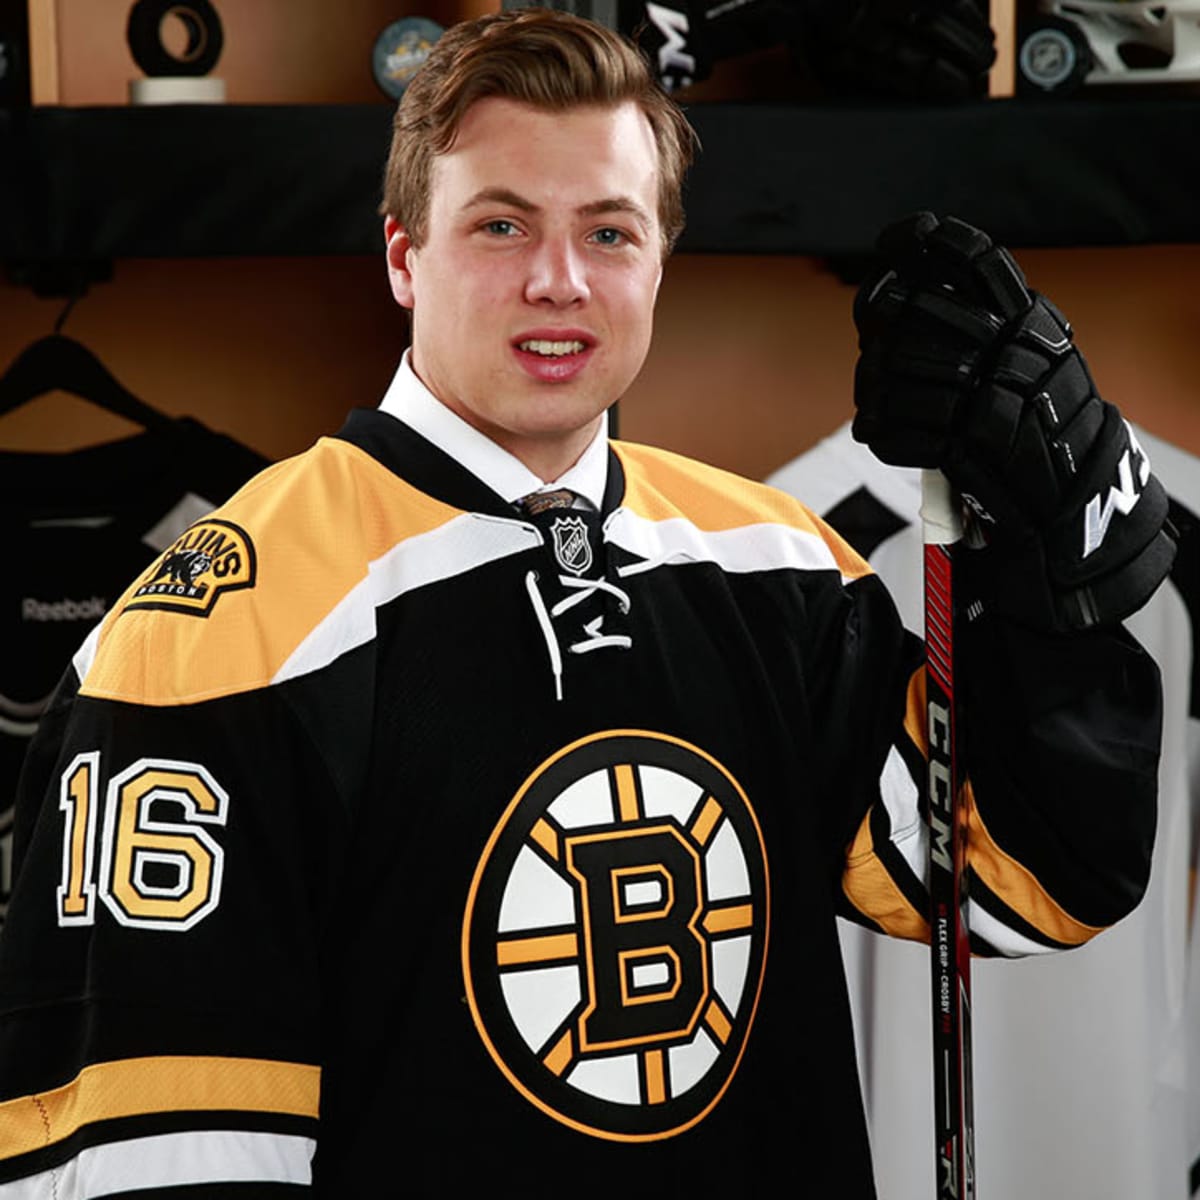 Bruins star McAvoy gets married at Boston Public Library